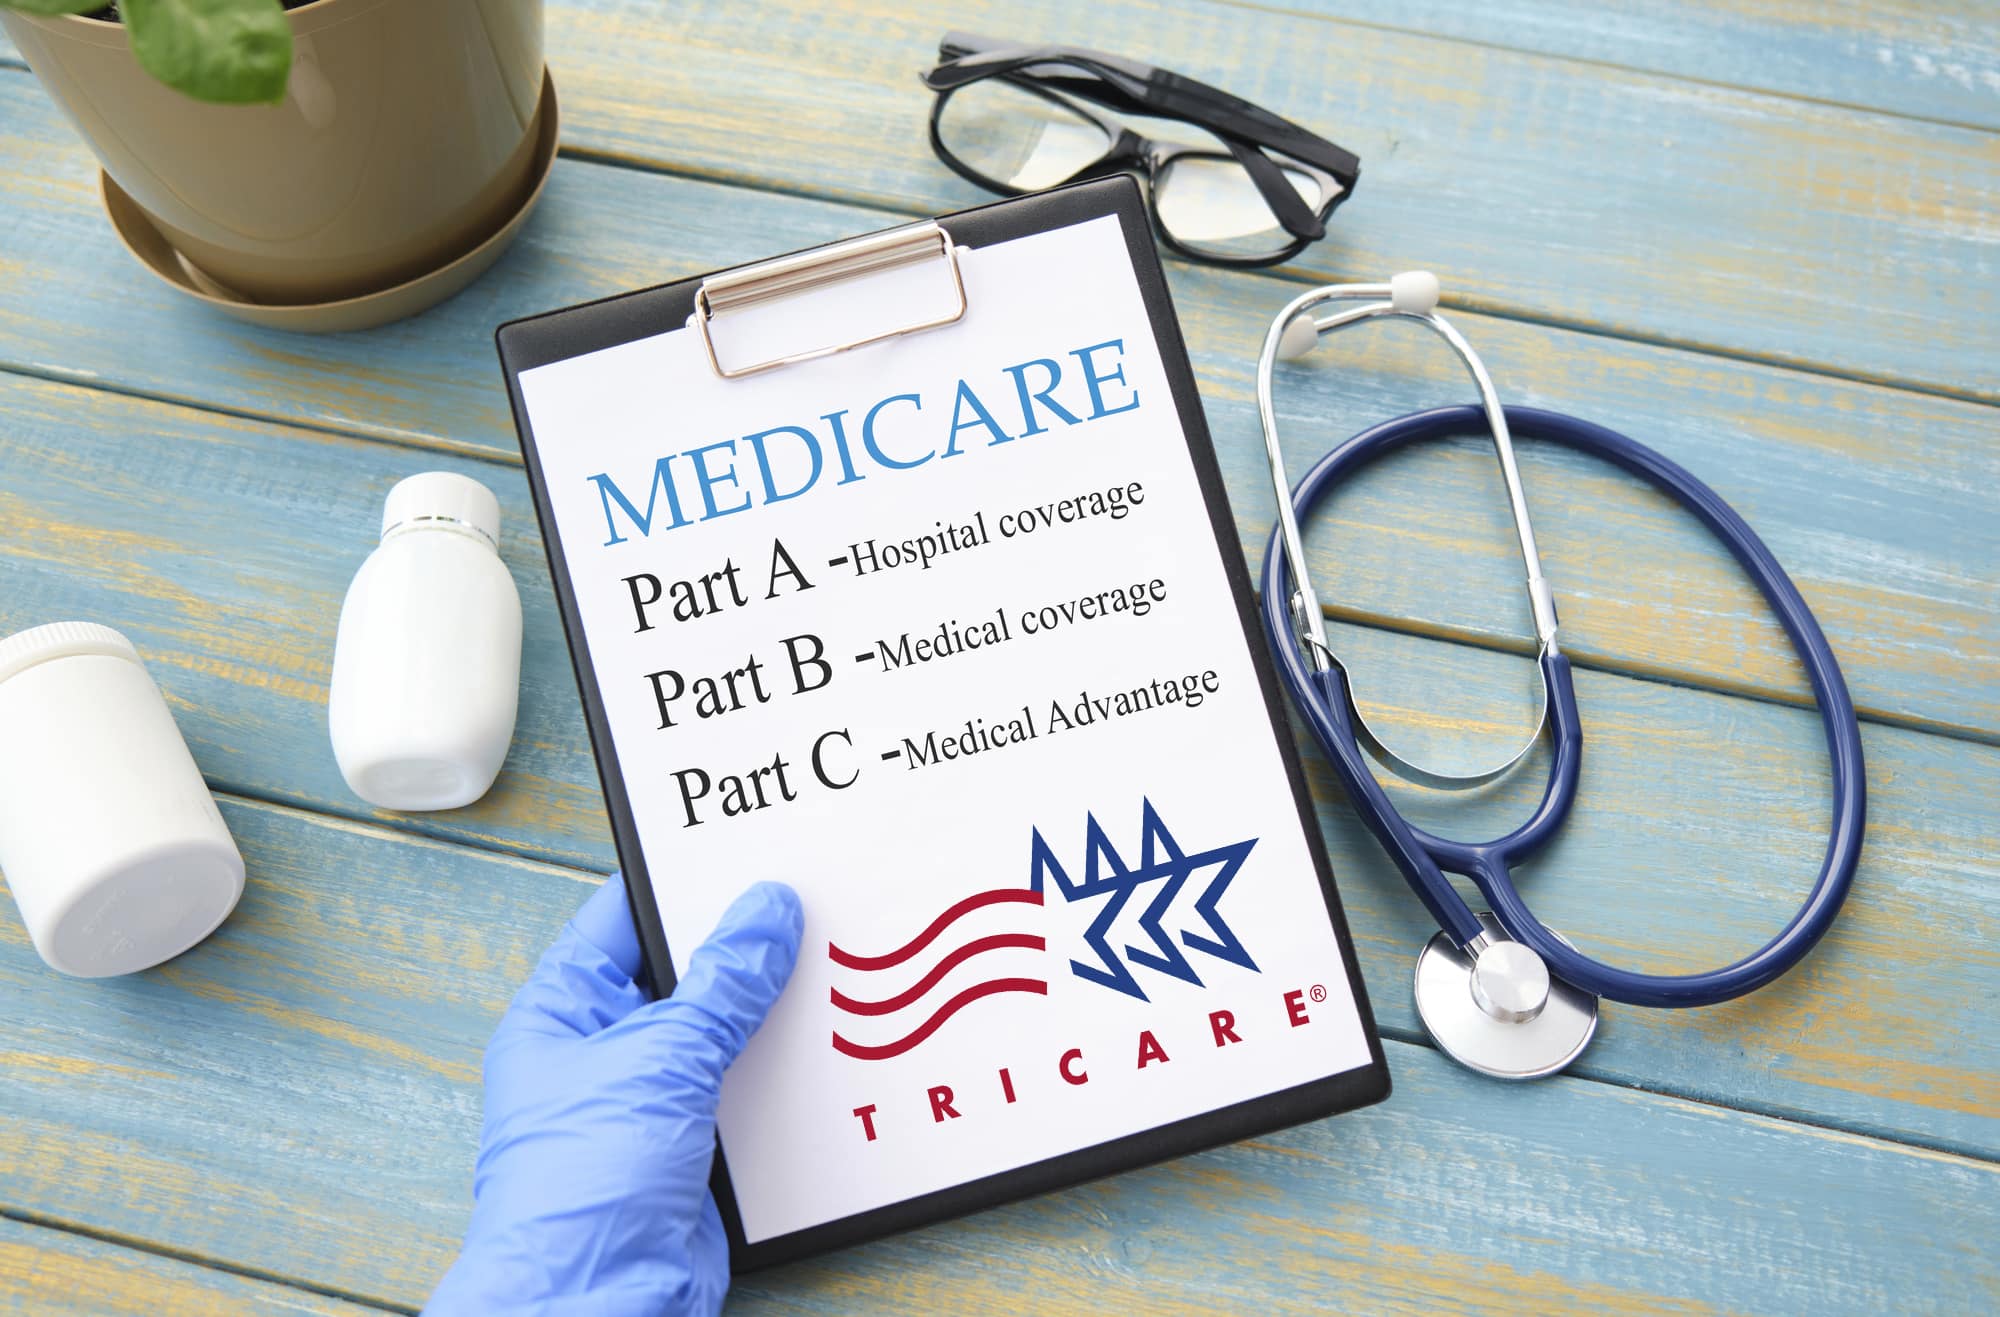 TRICARE coverage with medicare plans